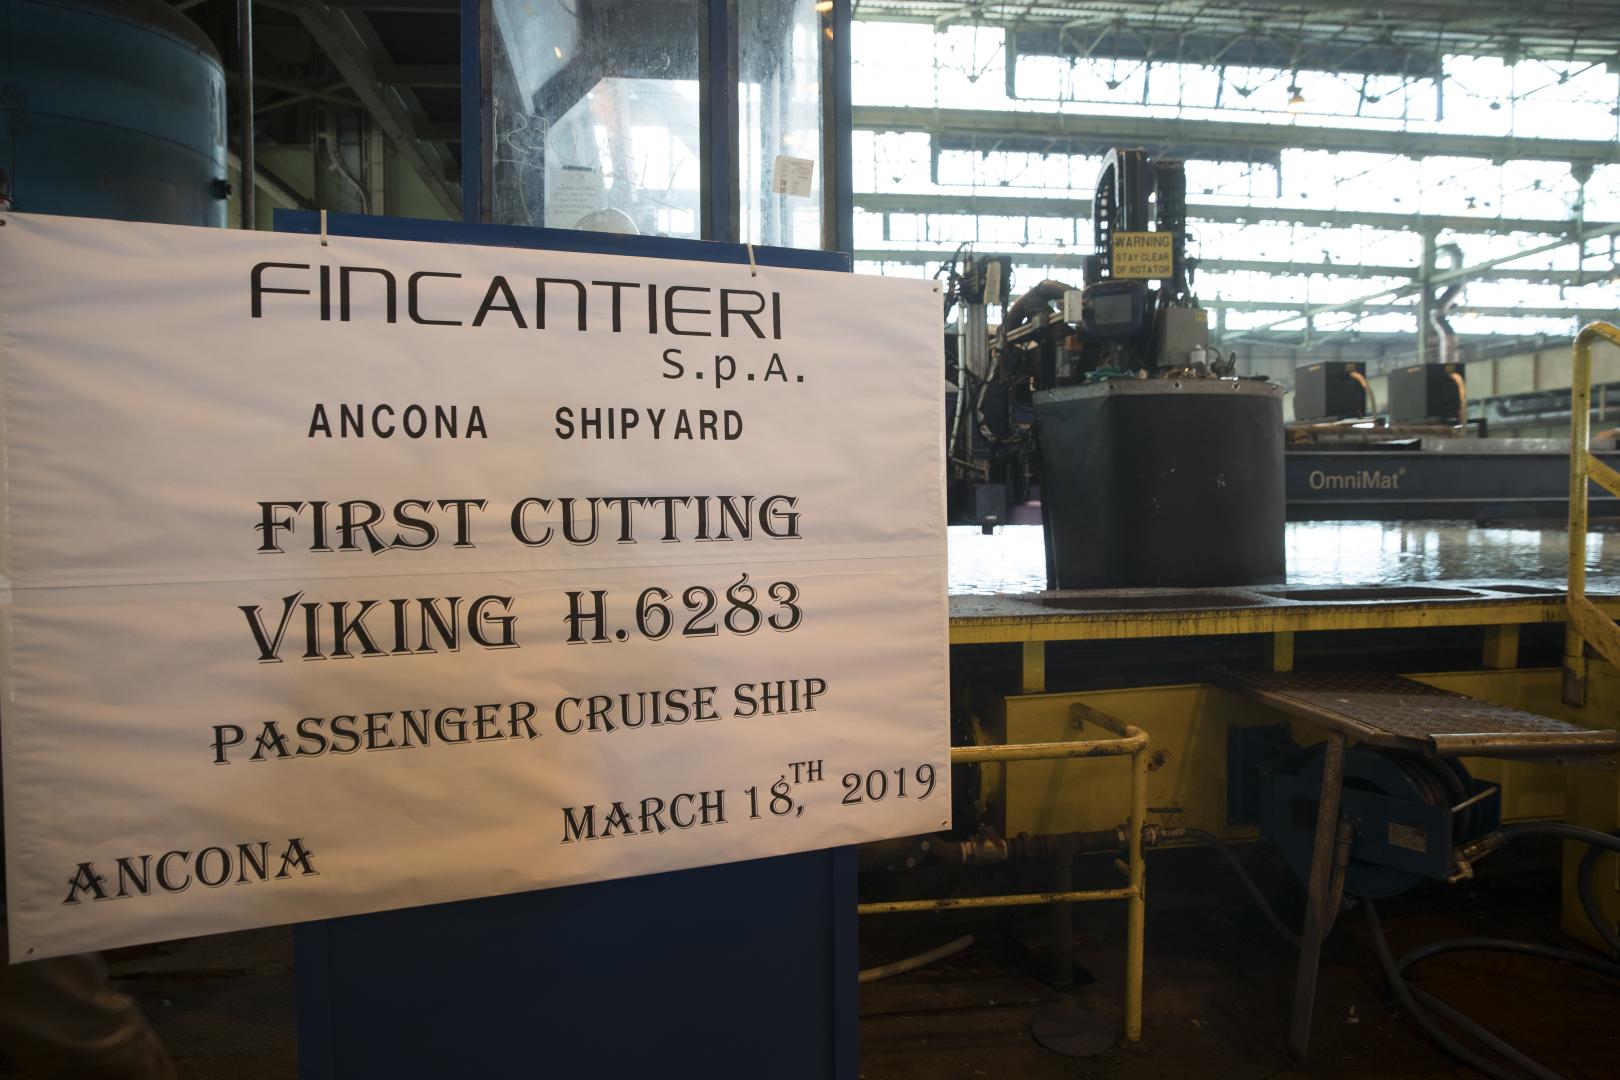 Fincantieri: works start in Ancona on the new ship for Viking